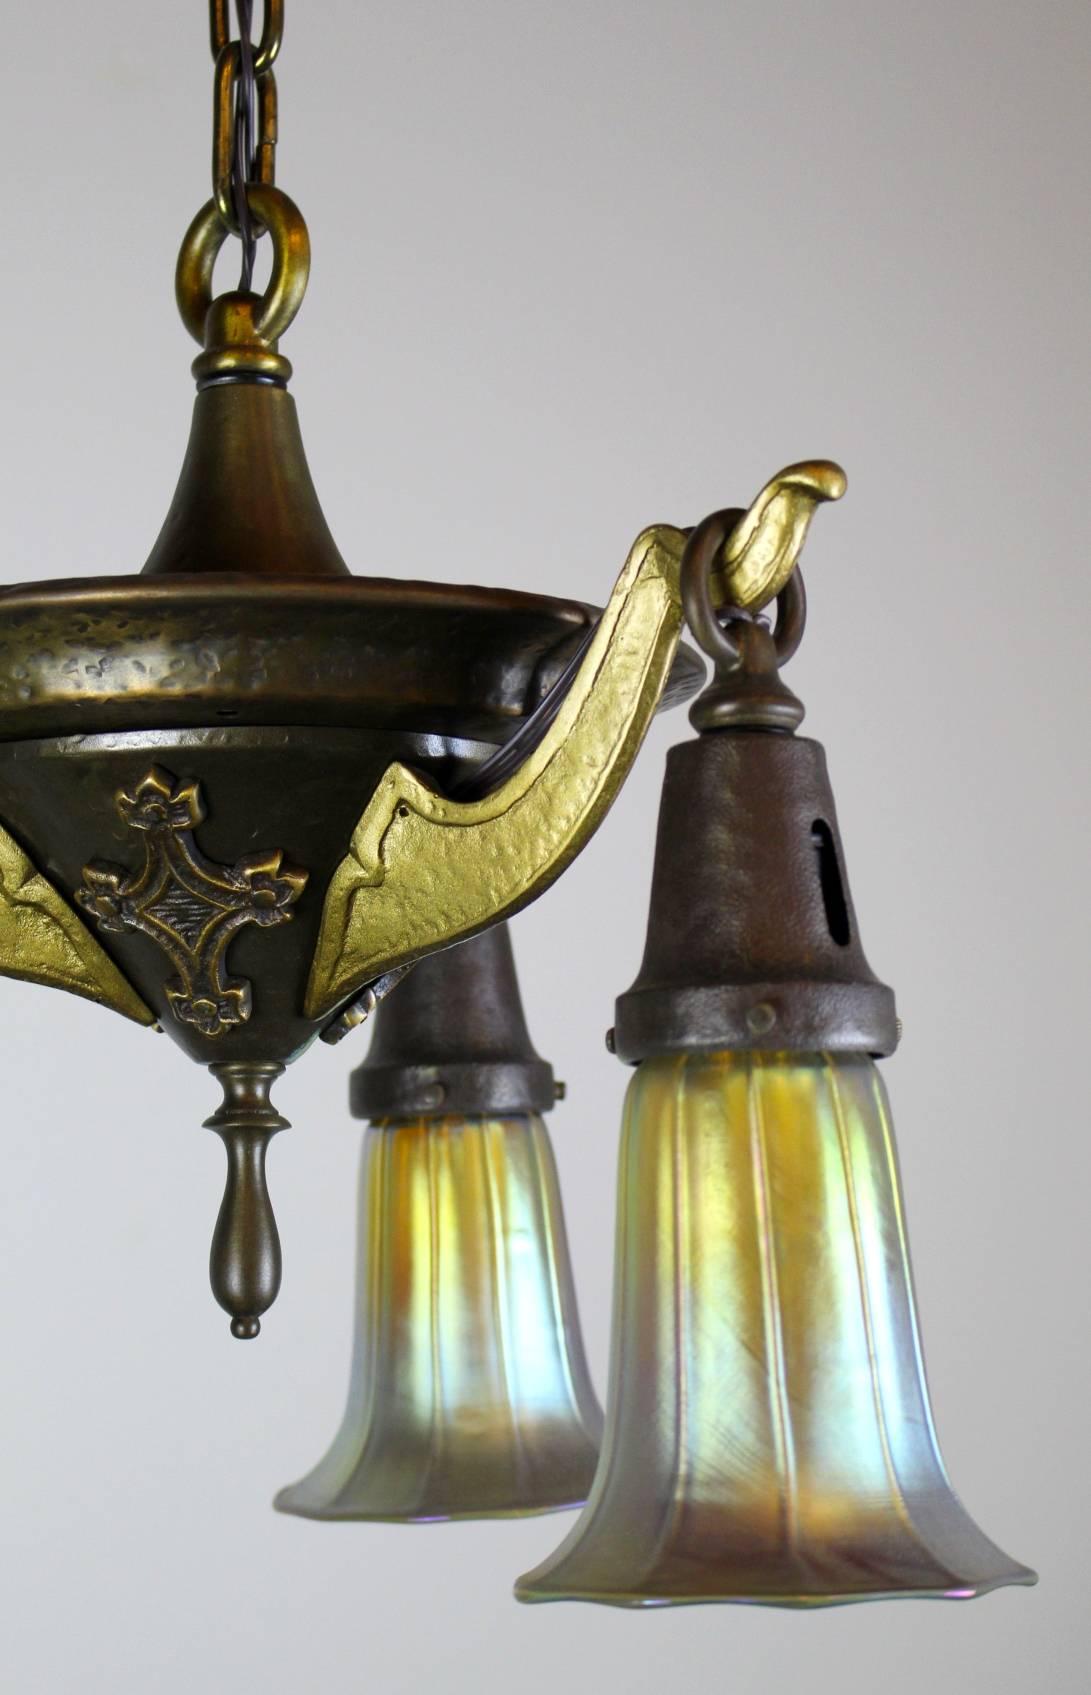 Three-Light Decorative Pan Fixture with Art Glass For Sale 2